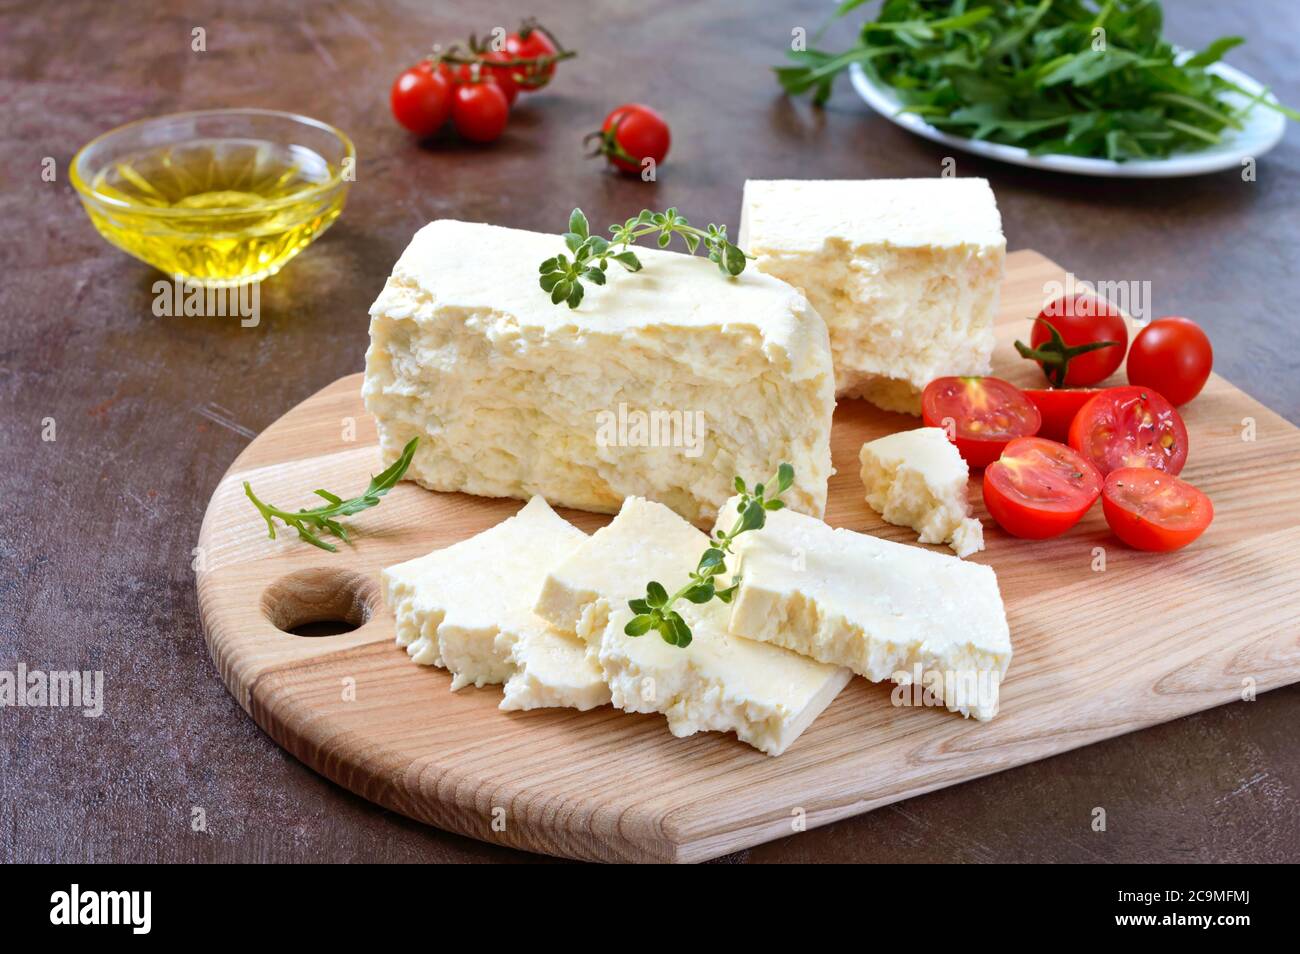 Delicious healthy sheep or goat feta cheese. Chunks of cheese on a wooden board. Stock Photo